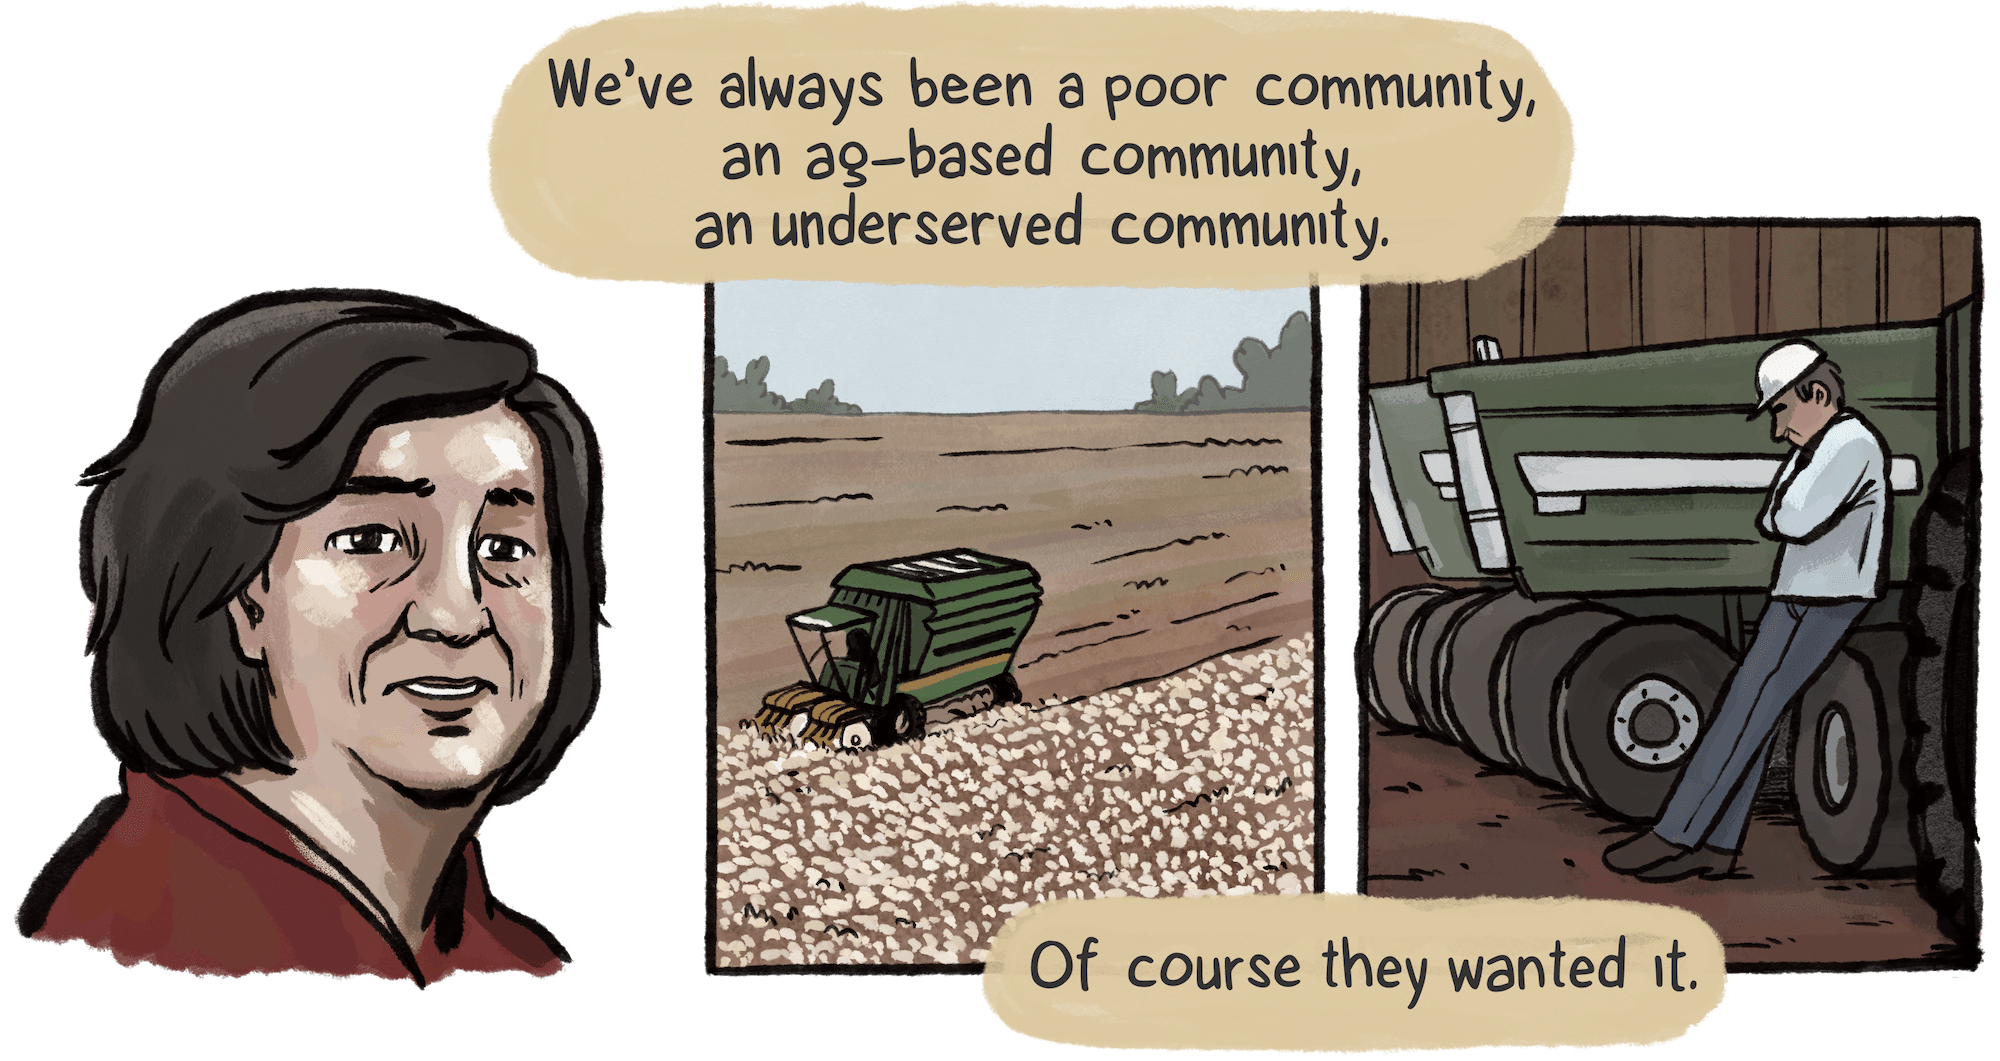 Todd says, “We’ve always been a poor community, an ag-based community, an underserved community. Of course, they wanted it” alongside scenes of farmland and a harvesting machine, and a man of medium skin tone in a white ball cap leans against a tractor.